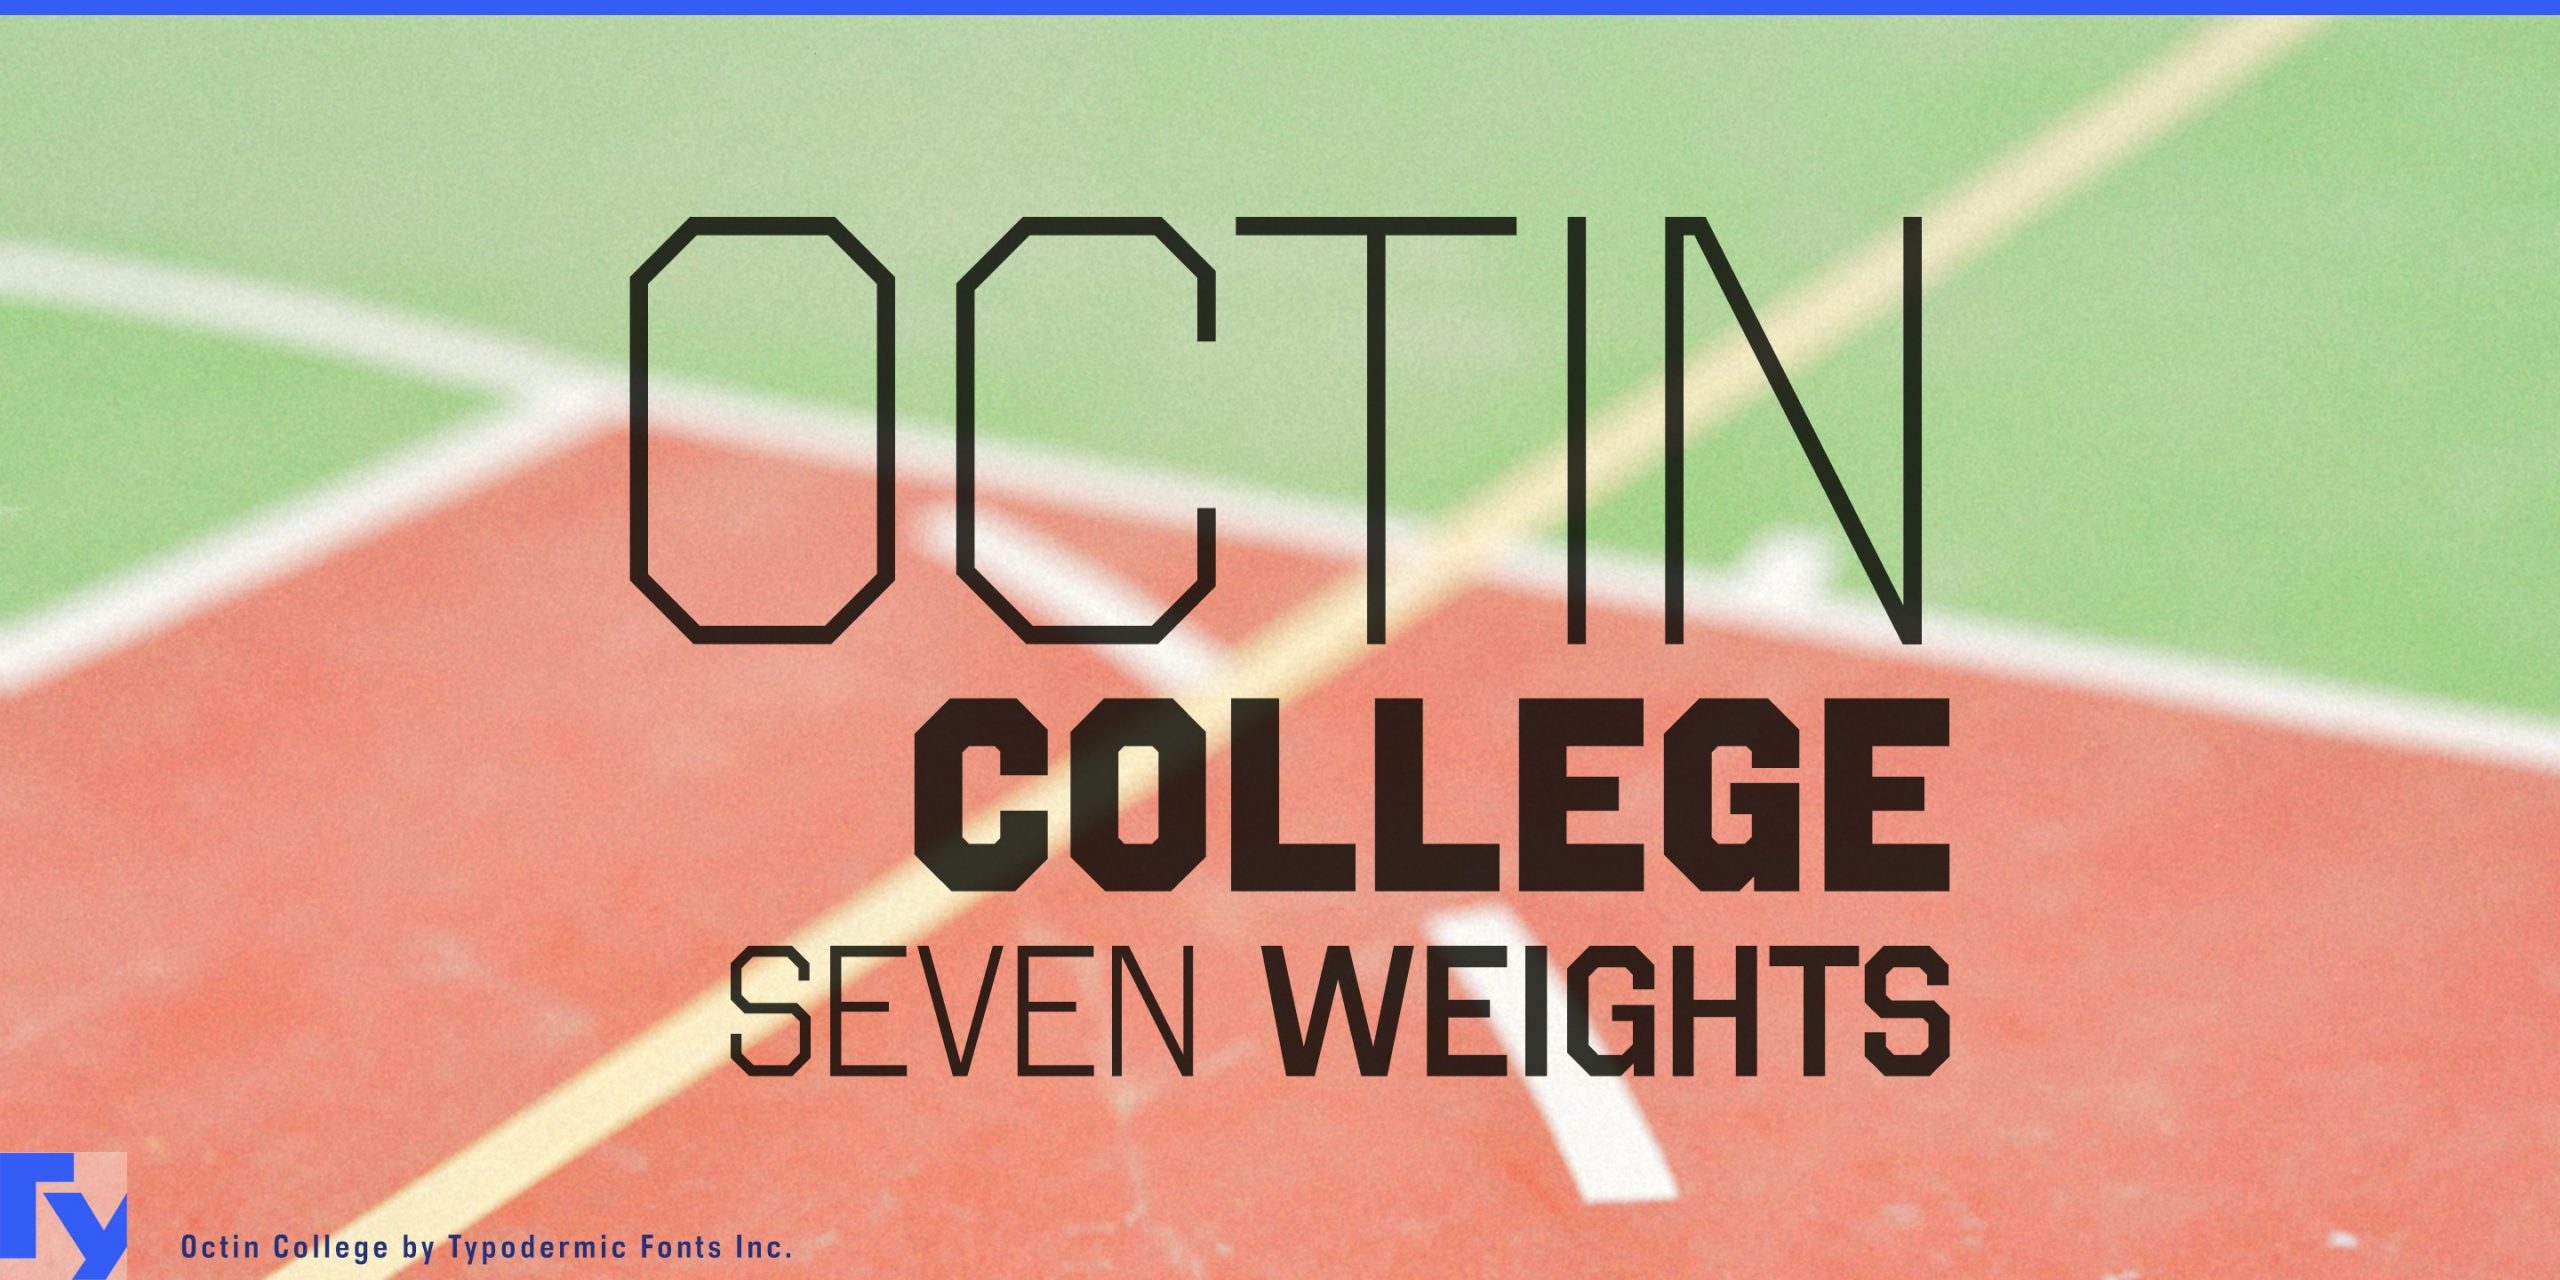 Beyond Academics: Octin College Typeface for Sports, Construction, and More